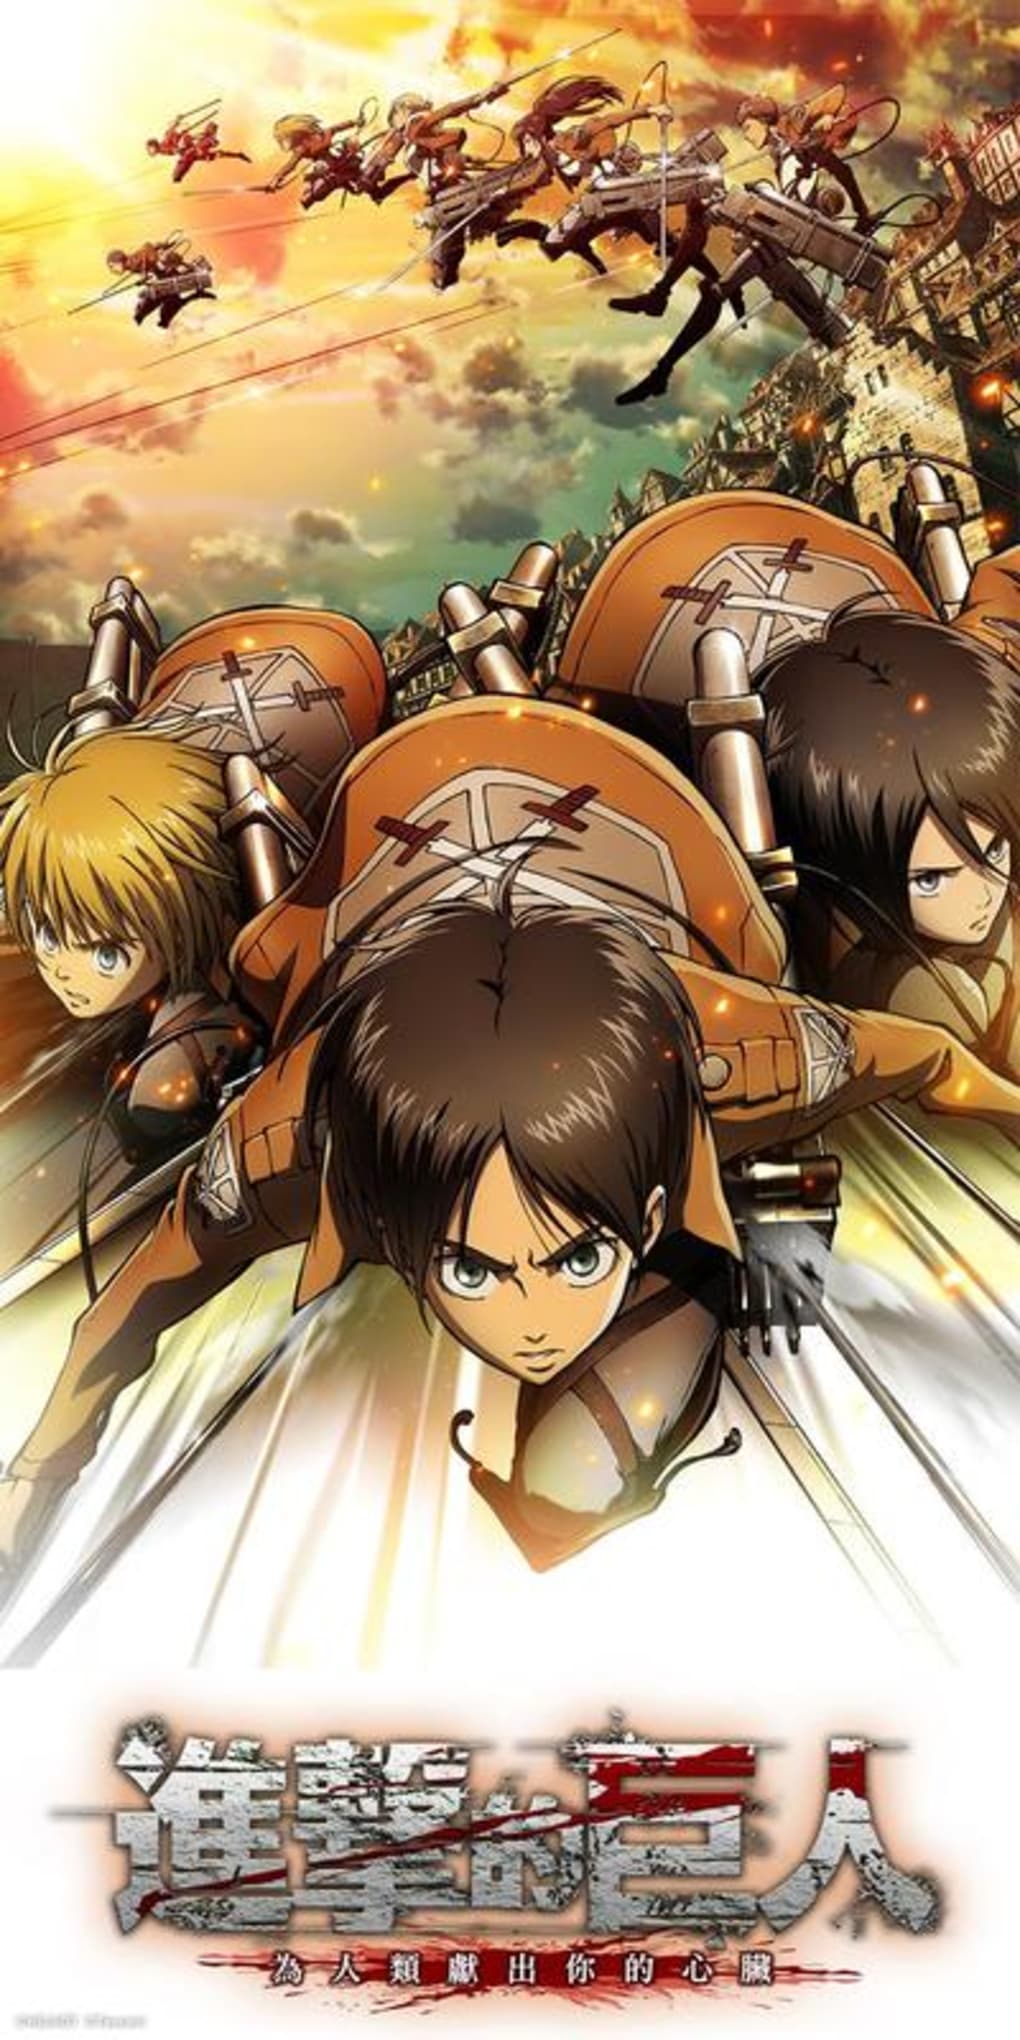 Guide Attack on Titan (Shingeki no kyojin) Game APK for Android Download